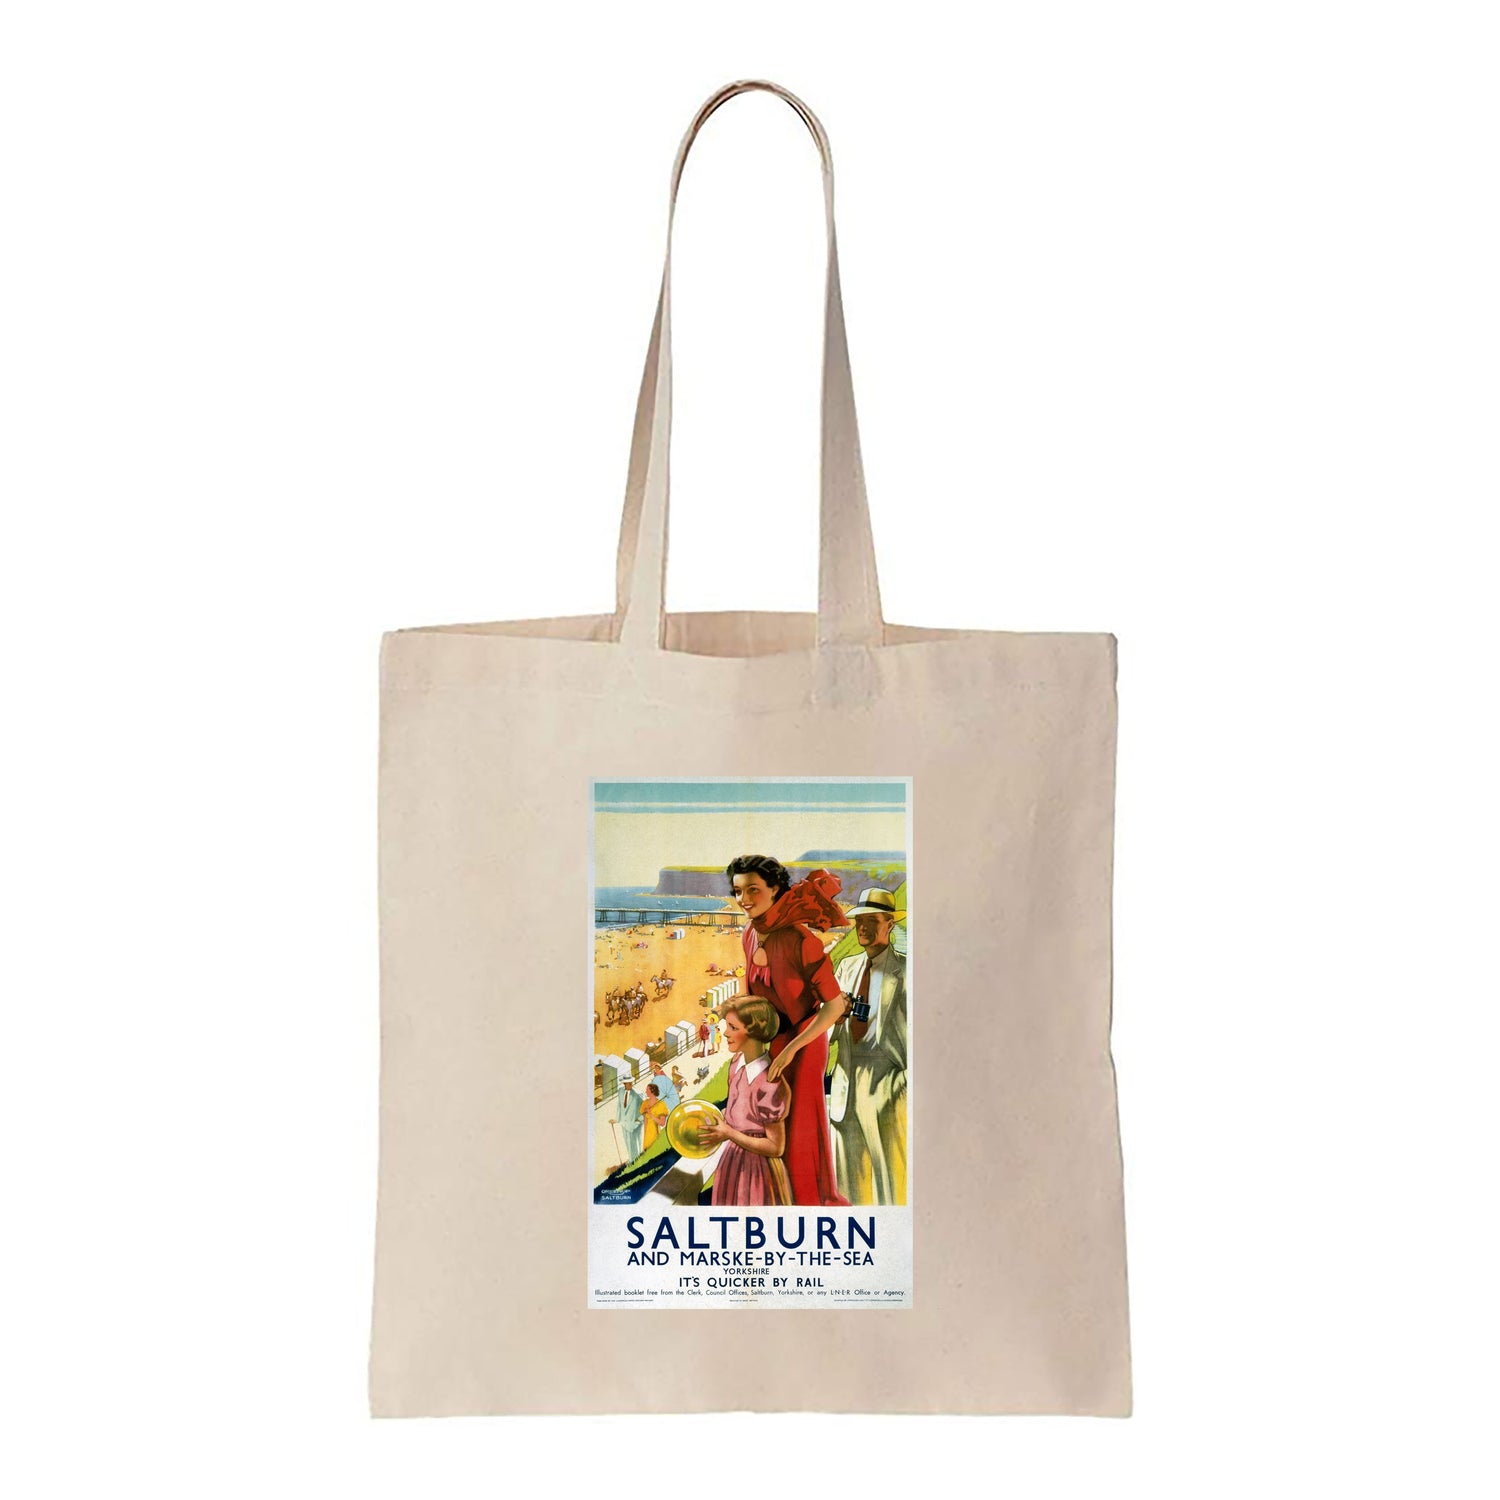 Saltburn and Marske-By-The-Sea, It's Quicker By Rail - Canvas Tote Bag